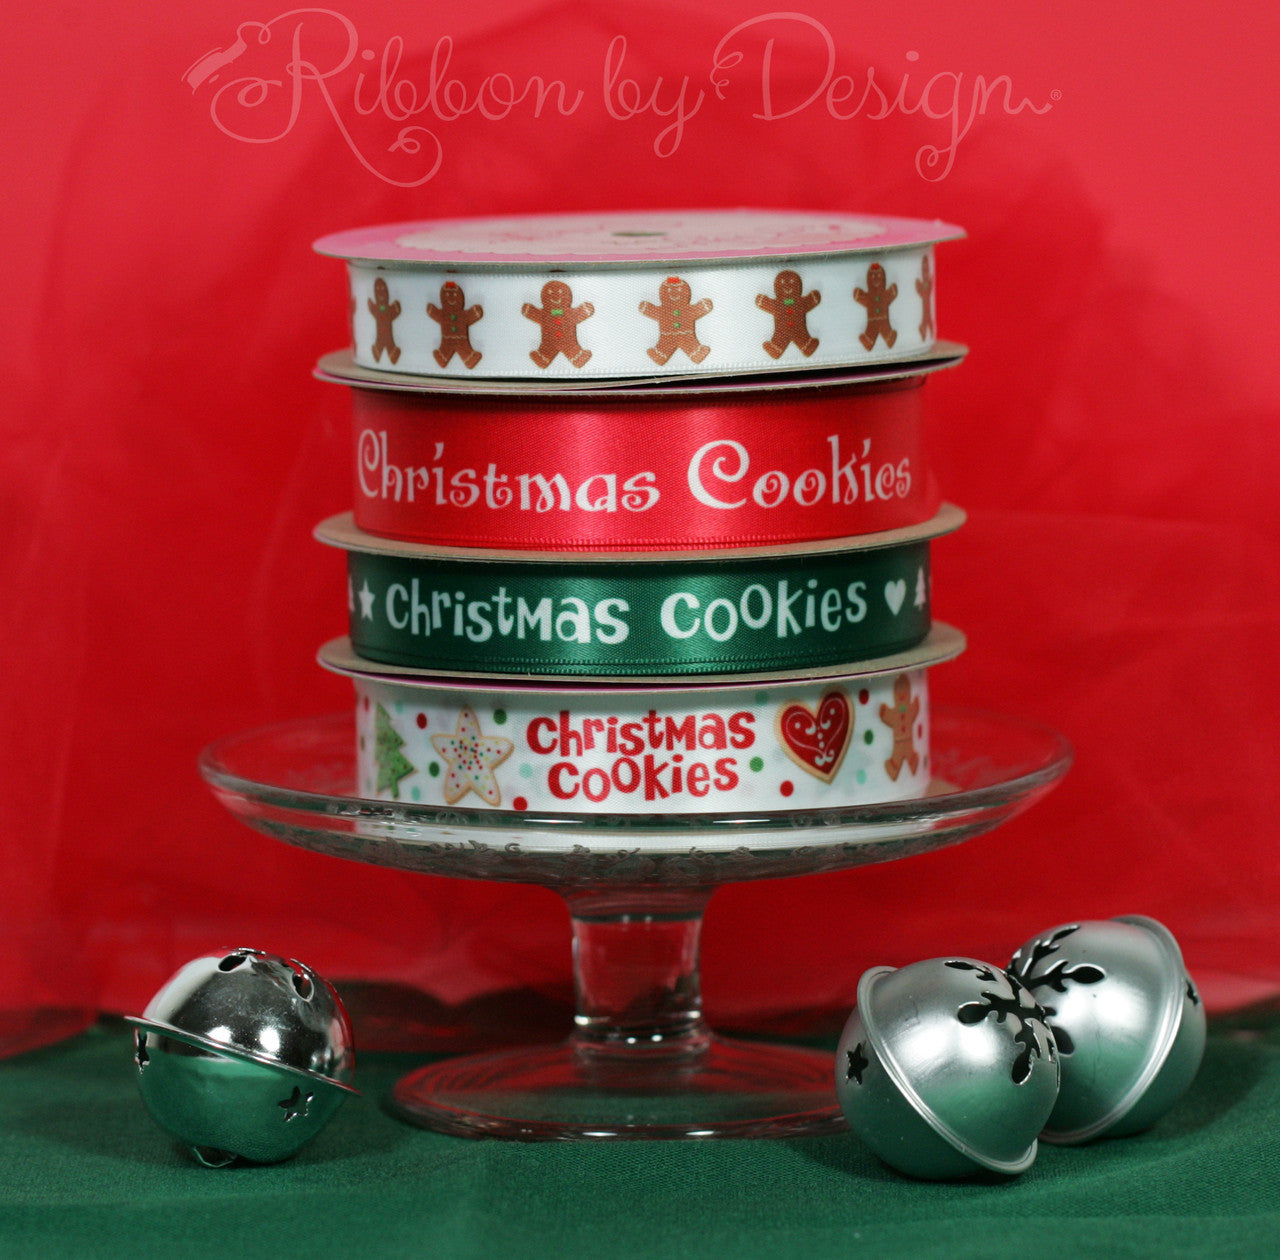 We have a complete collection of Christmas cookies for your gift giving to friends, teachers, co-workers and family!